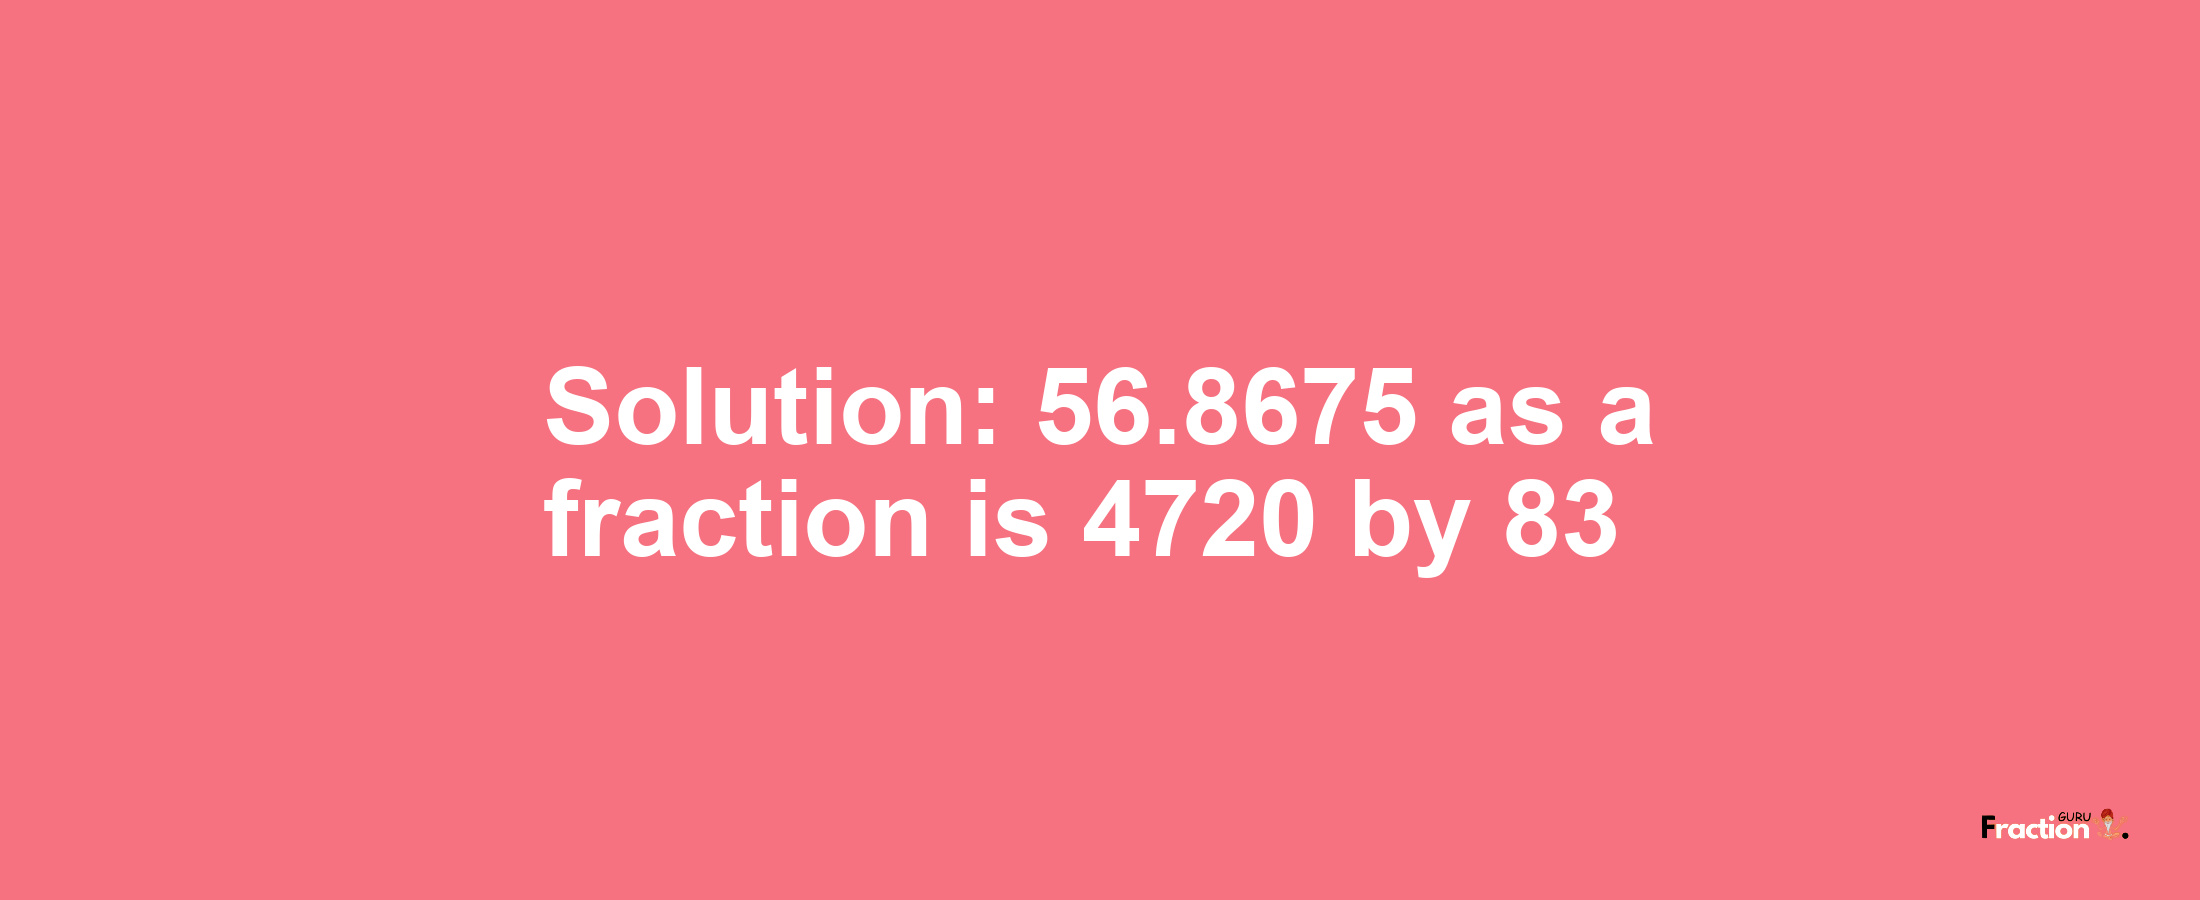 Solution:56.8675 as a fraction is 4720/83